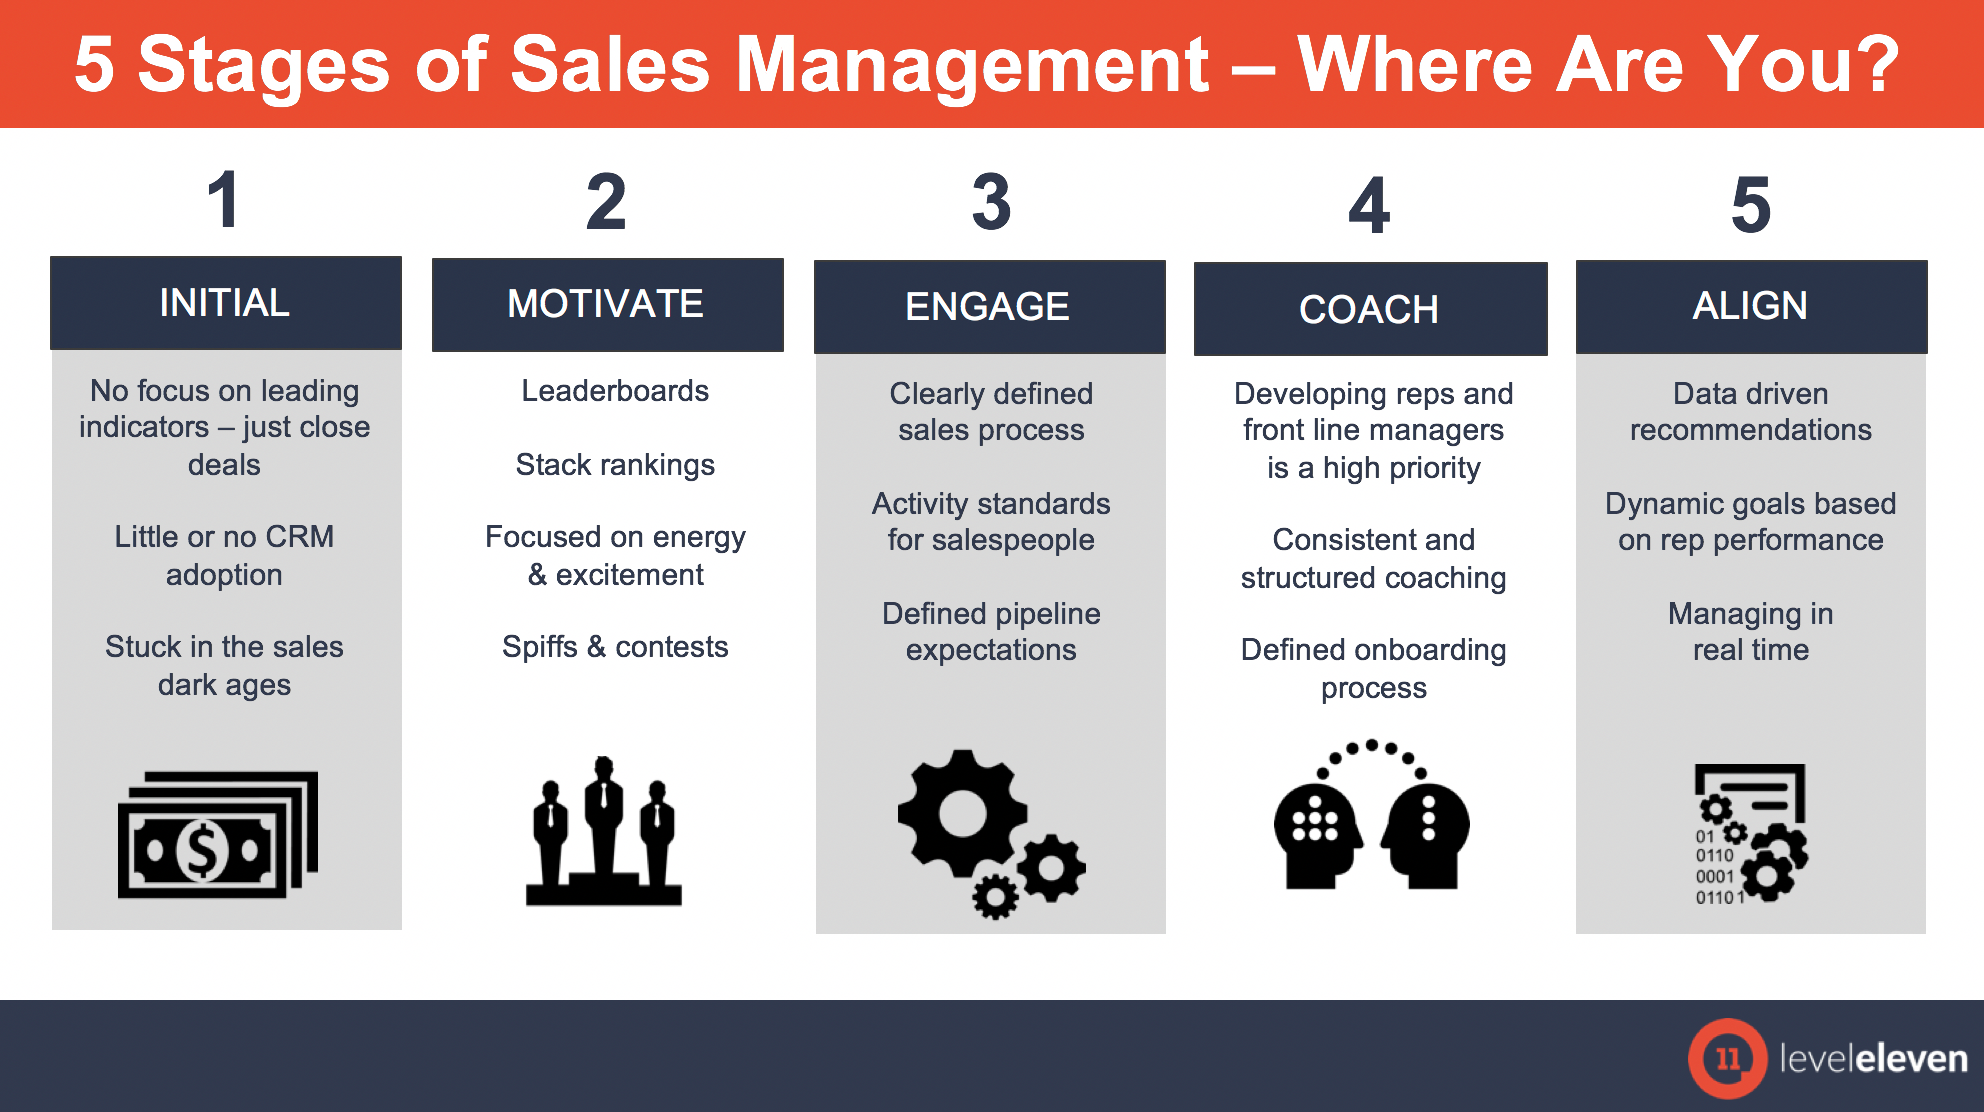 Where Are You? The 5 Stages of Sales Management